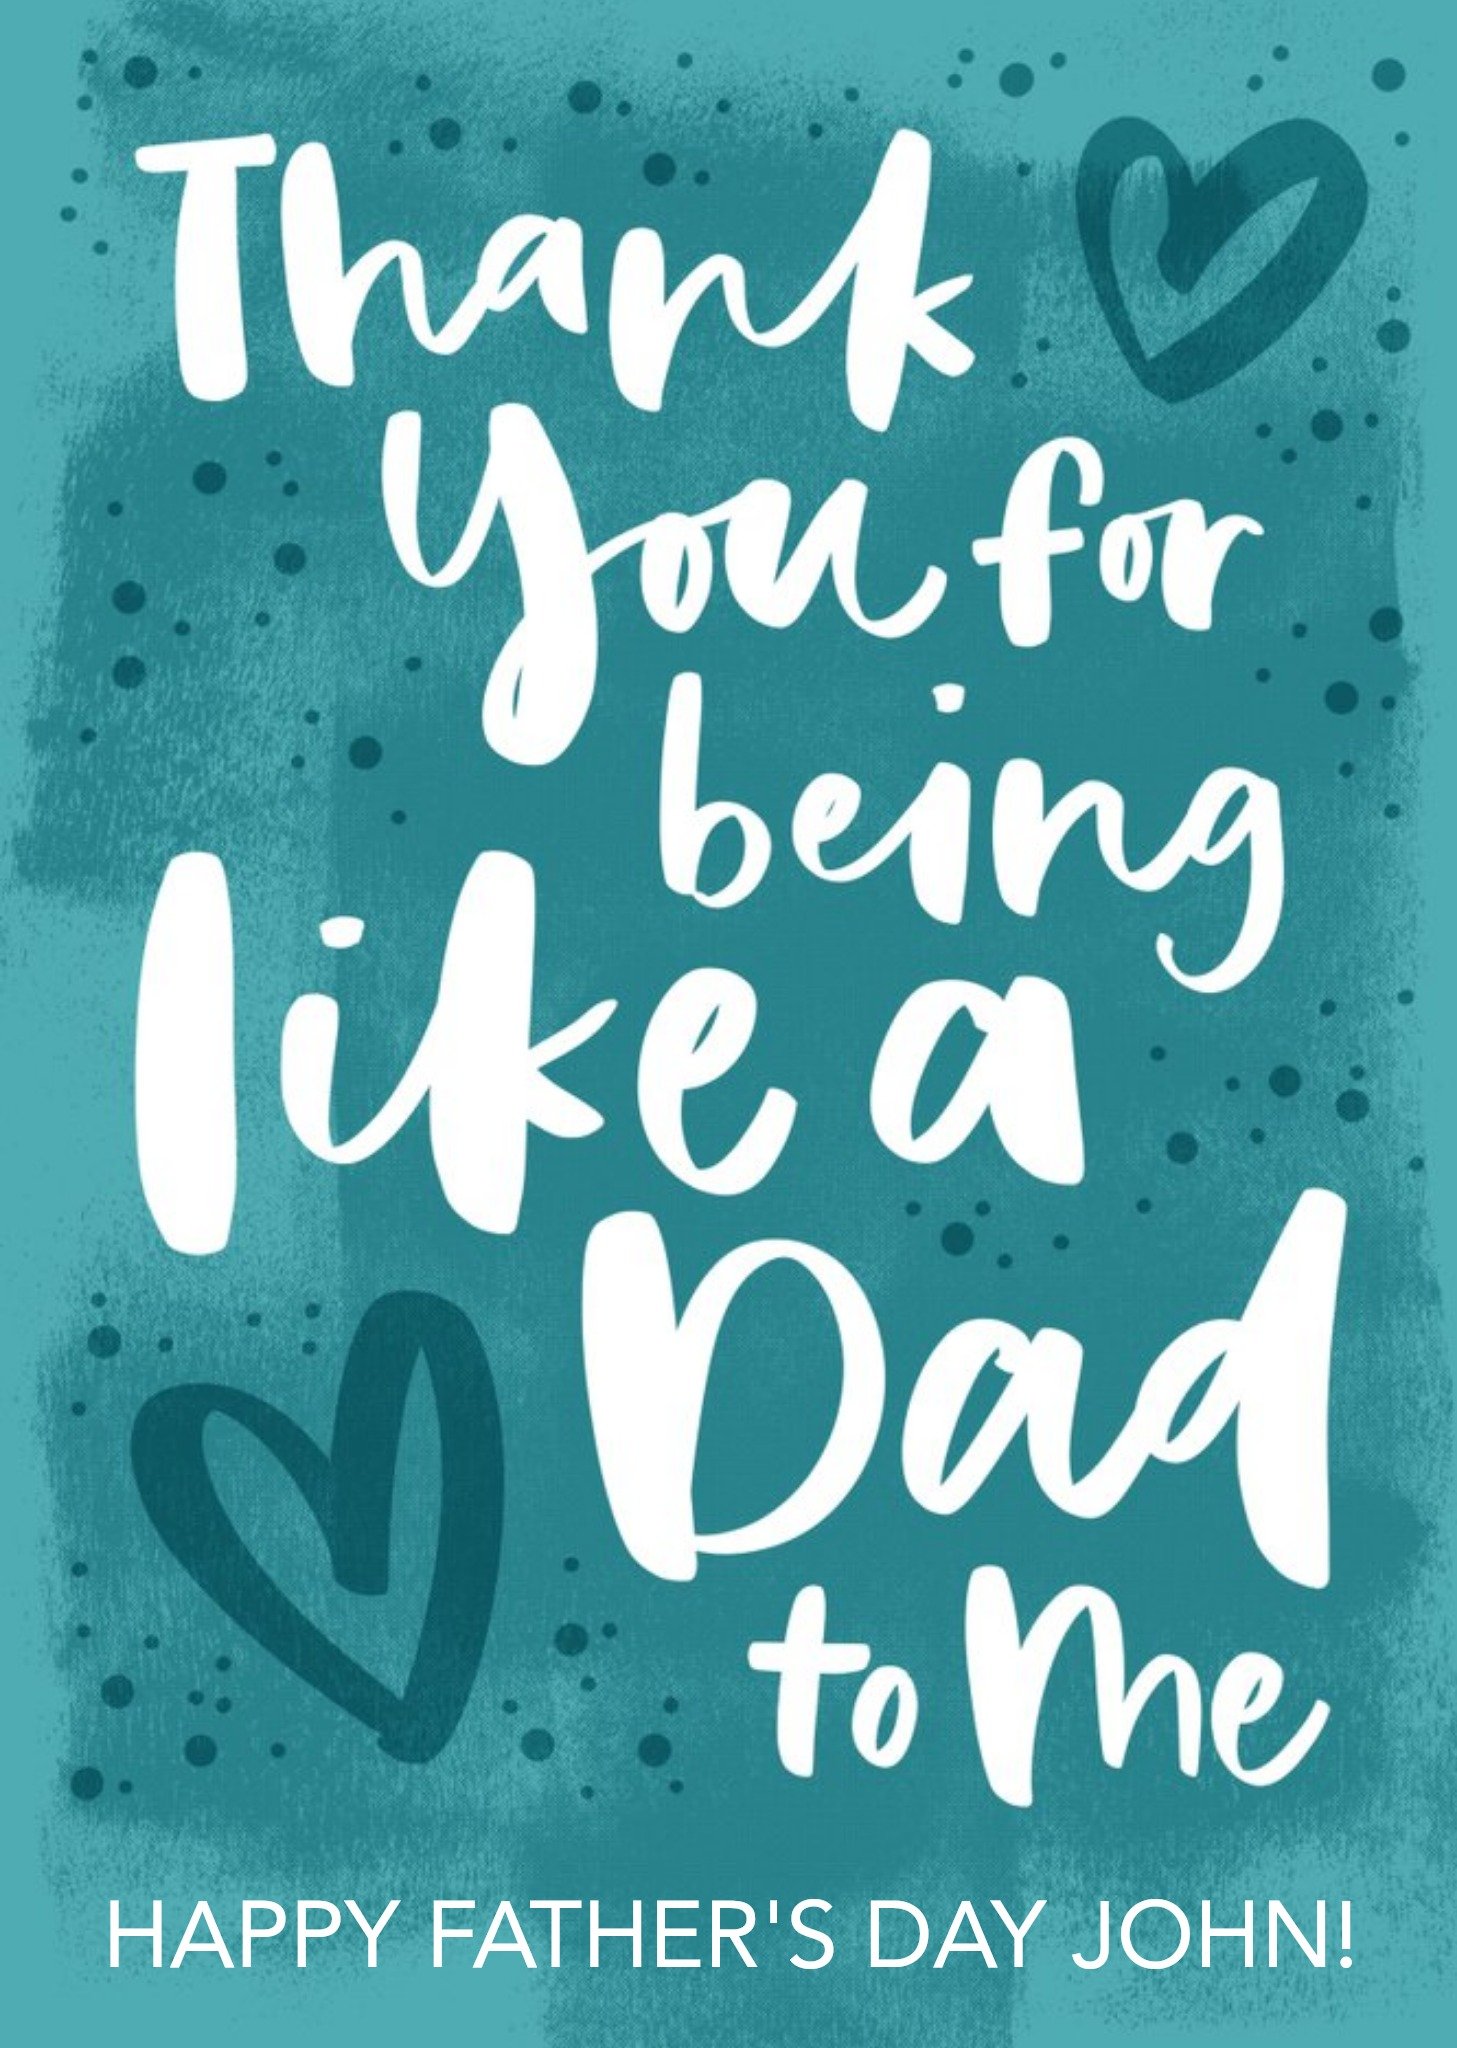 Moonpig Modern Typographic Thank You For Being Like A Dad To Me Father's Day Card, Large